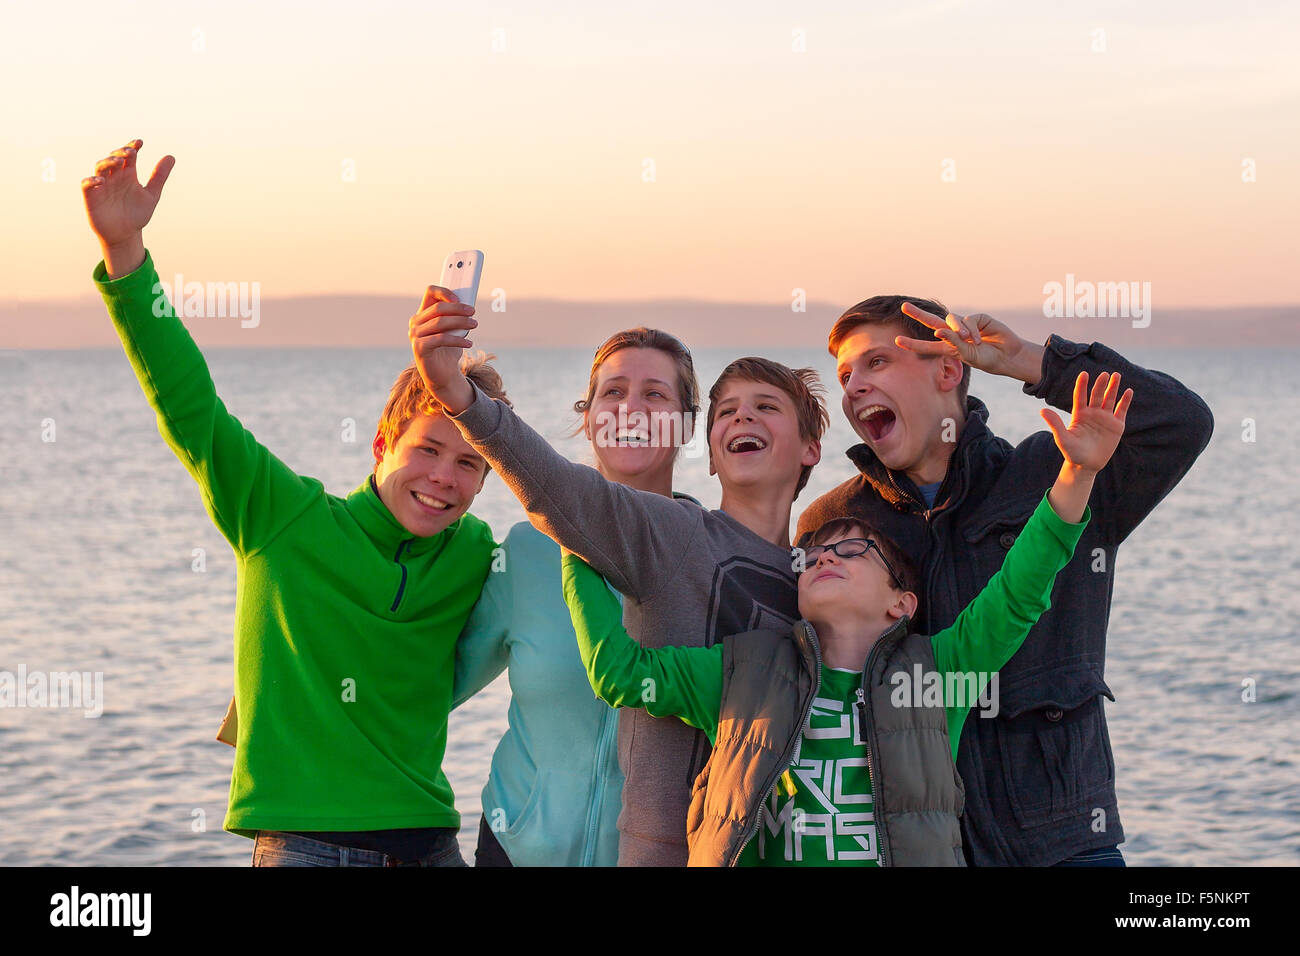 Group of happy young people taking a selfie with a white smart phone in front of a lake Stock Photo